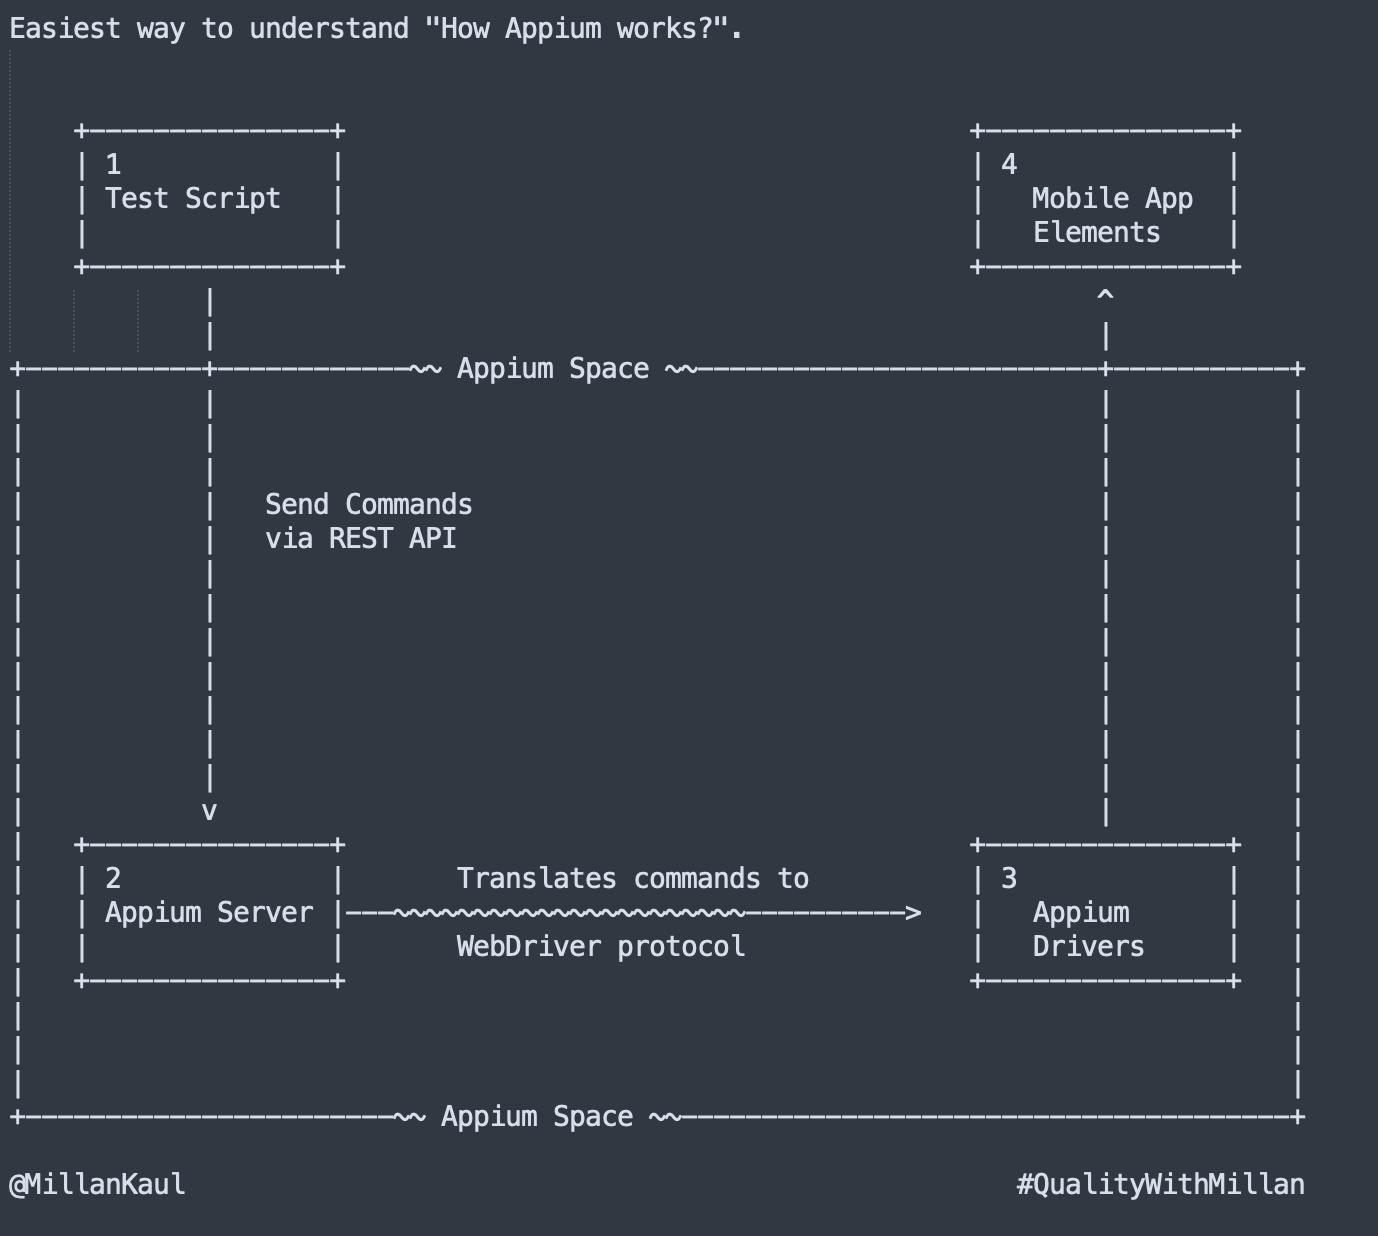 "Image showing 4 steps of how appium works in mobile app automation"